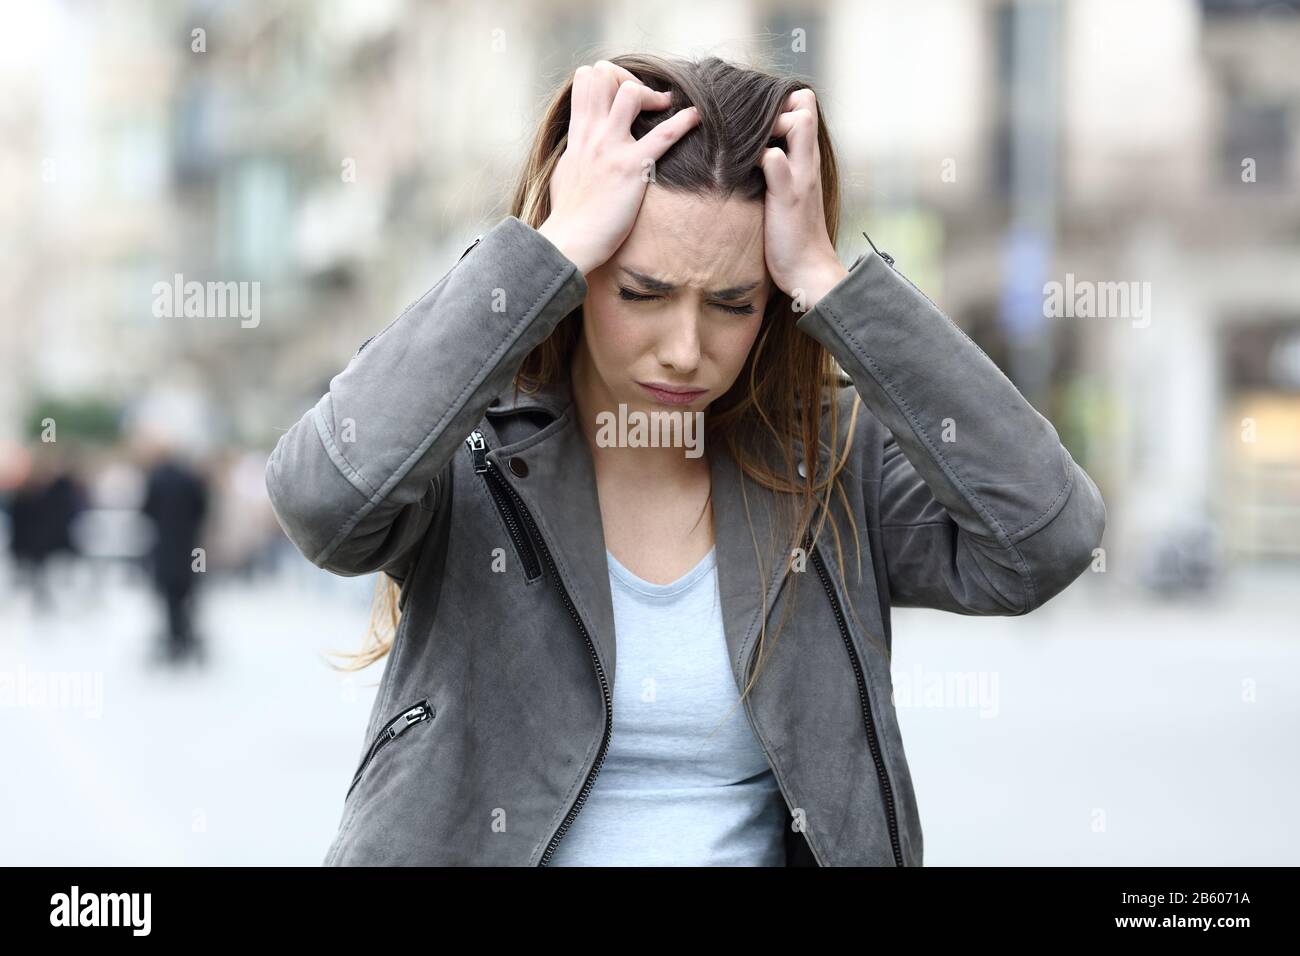 Stressed young girl grabbing her head complaining alone on city street Stock Photo